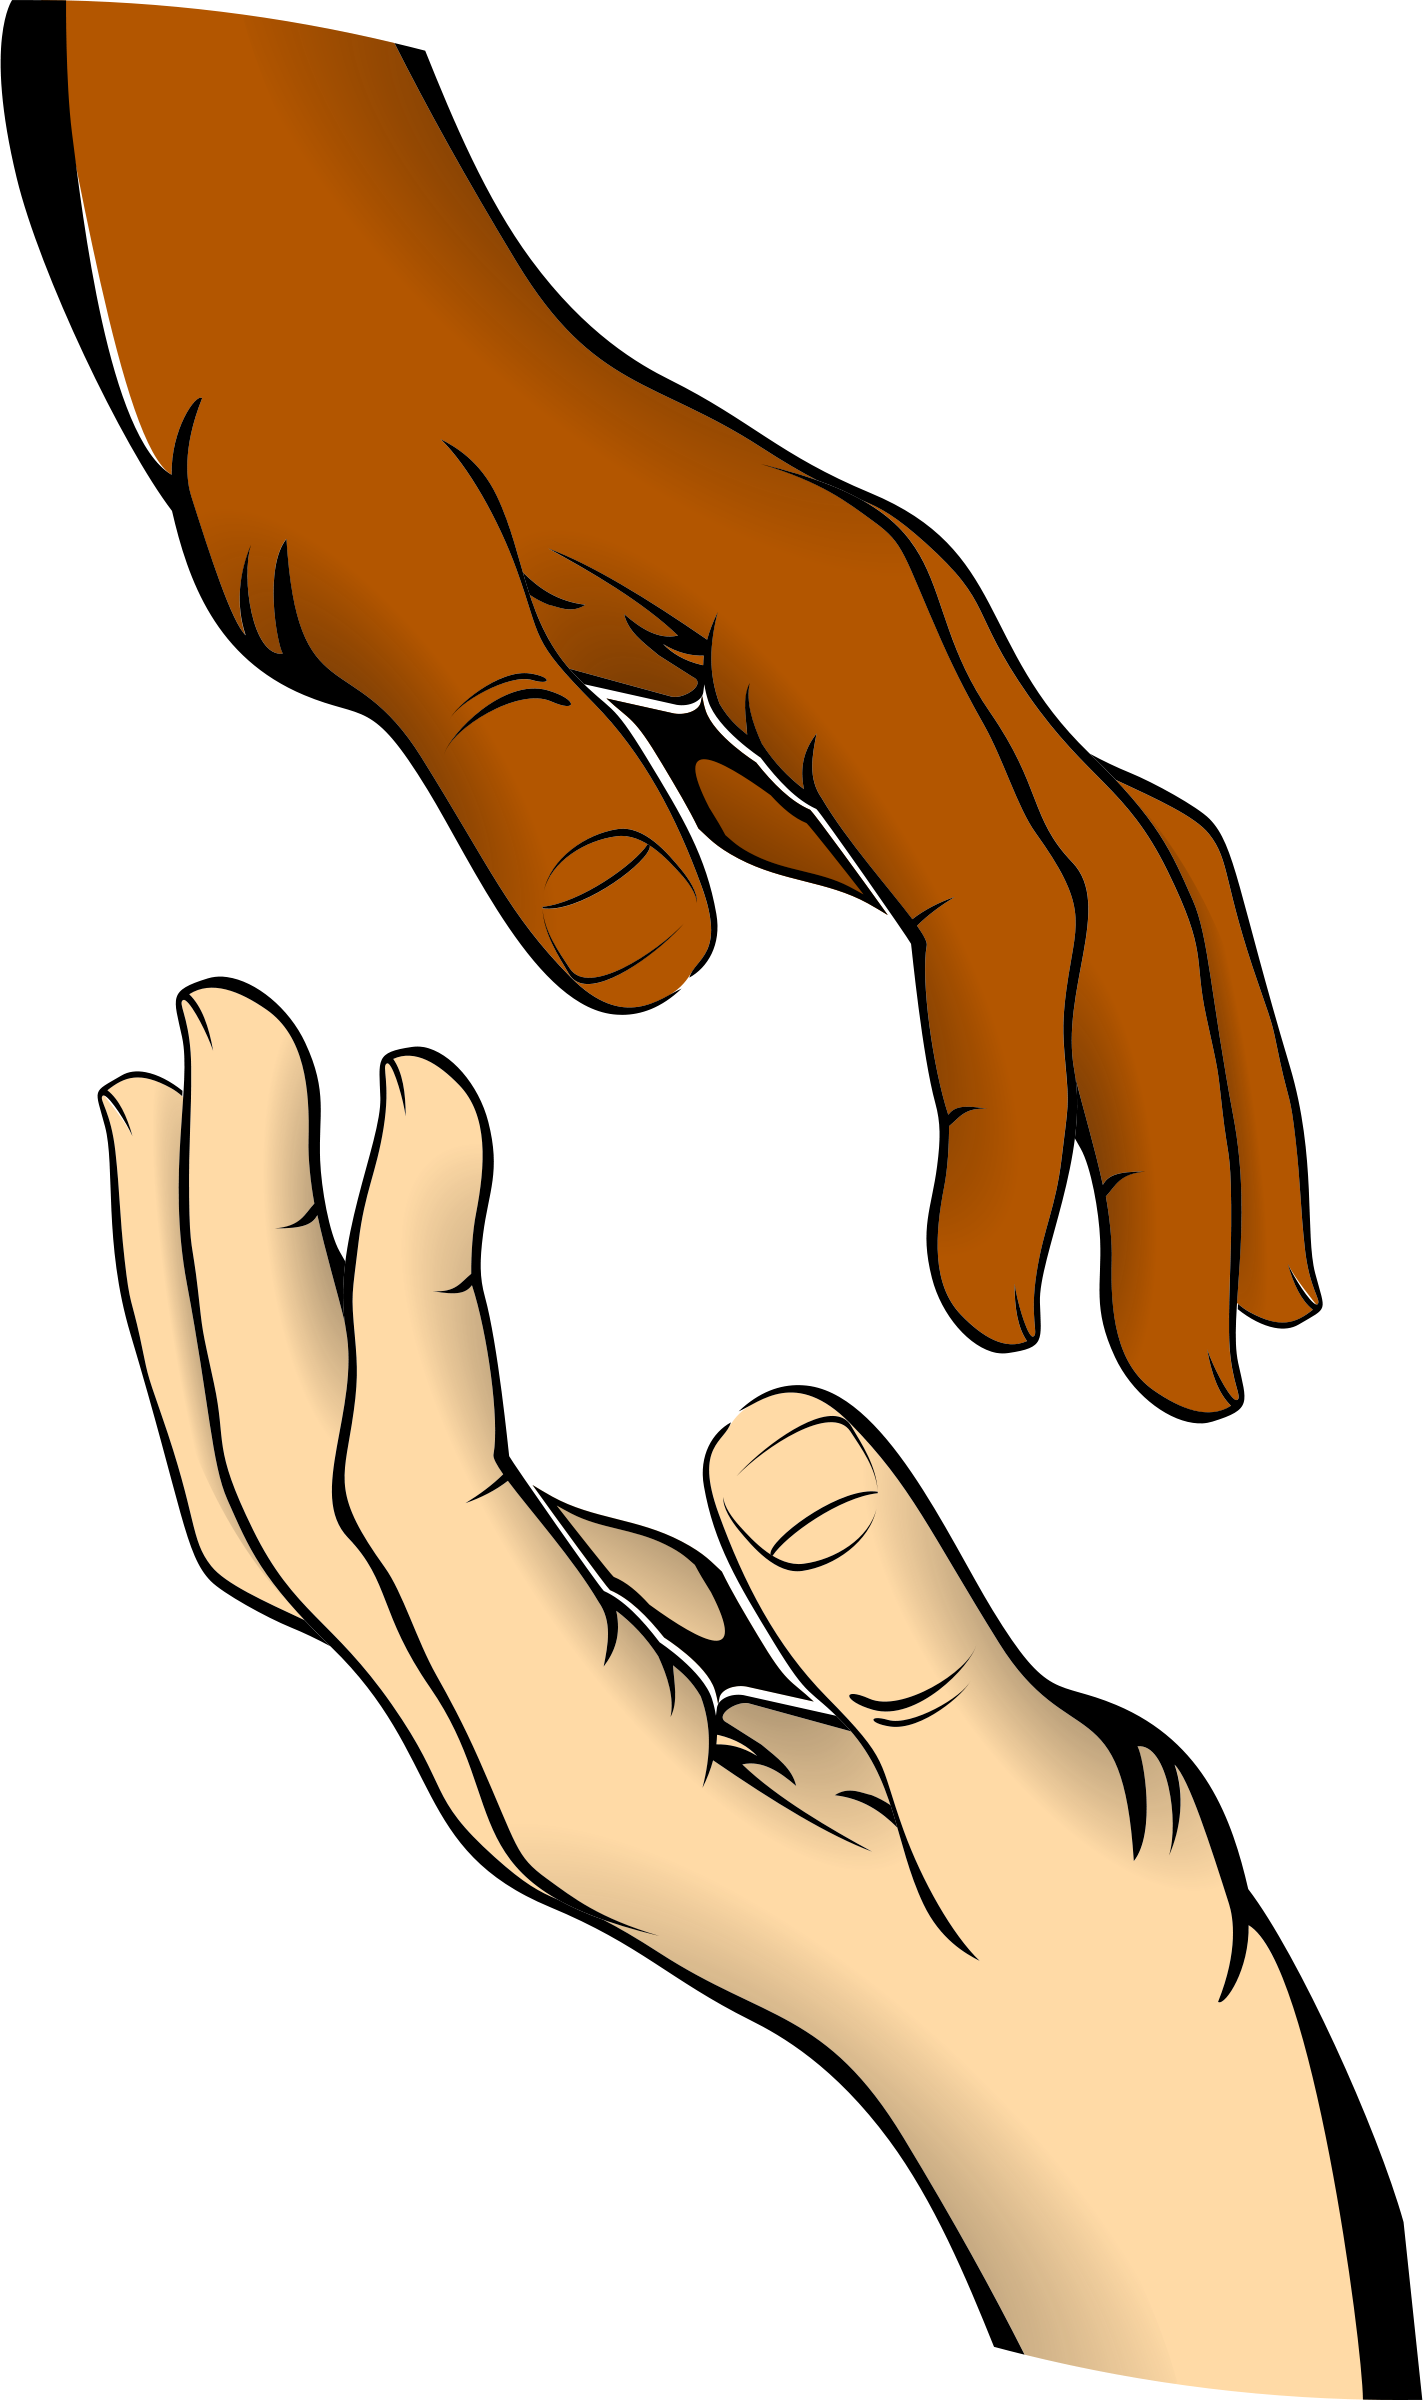 Cartoon Hand Reaching Out Png : Pngkit selects 15 hd hand reaching out...